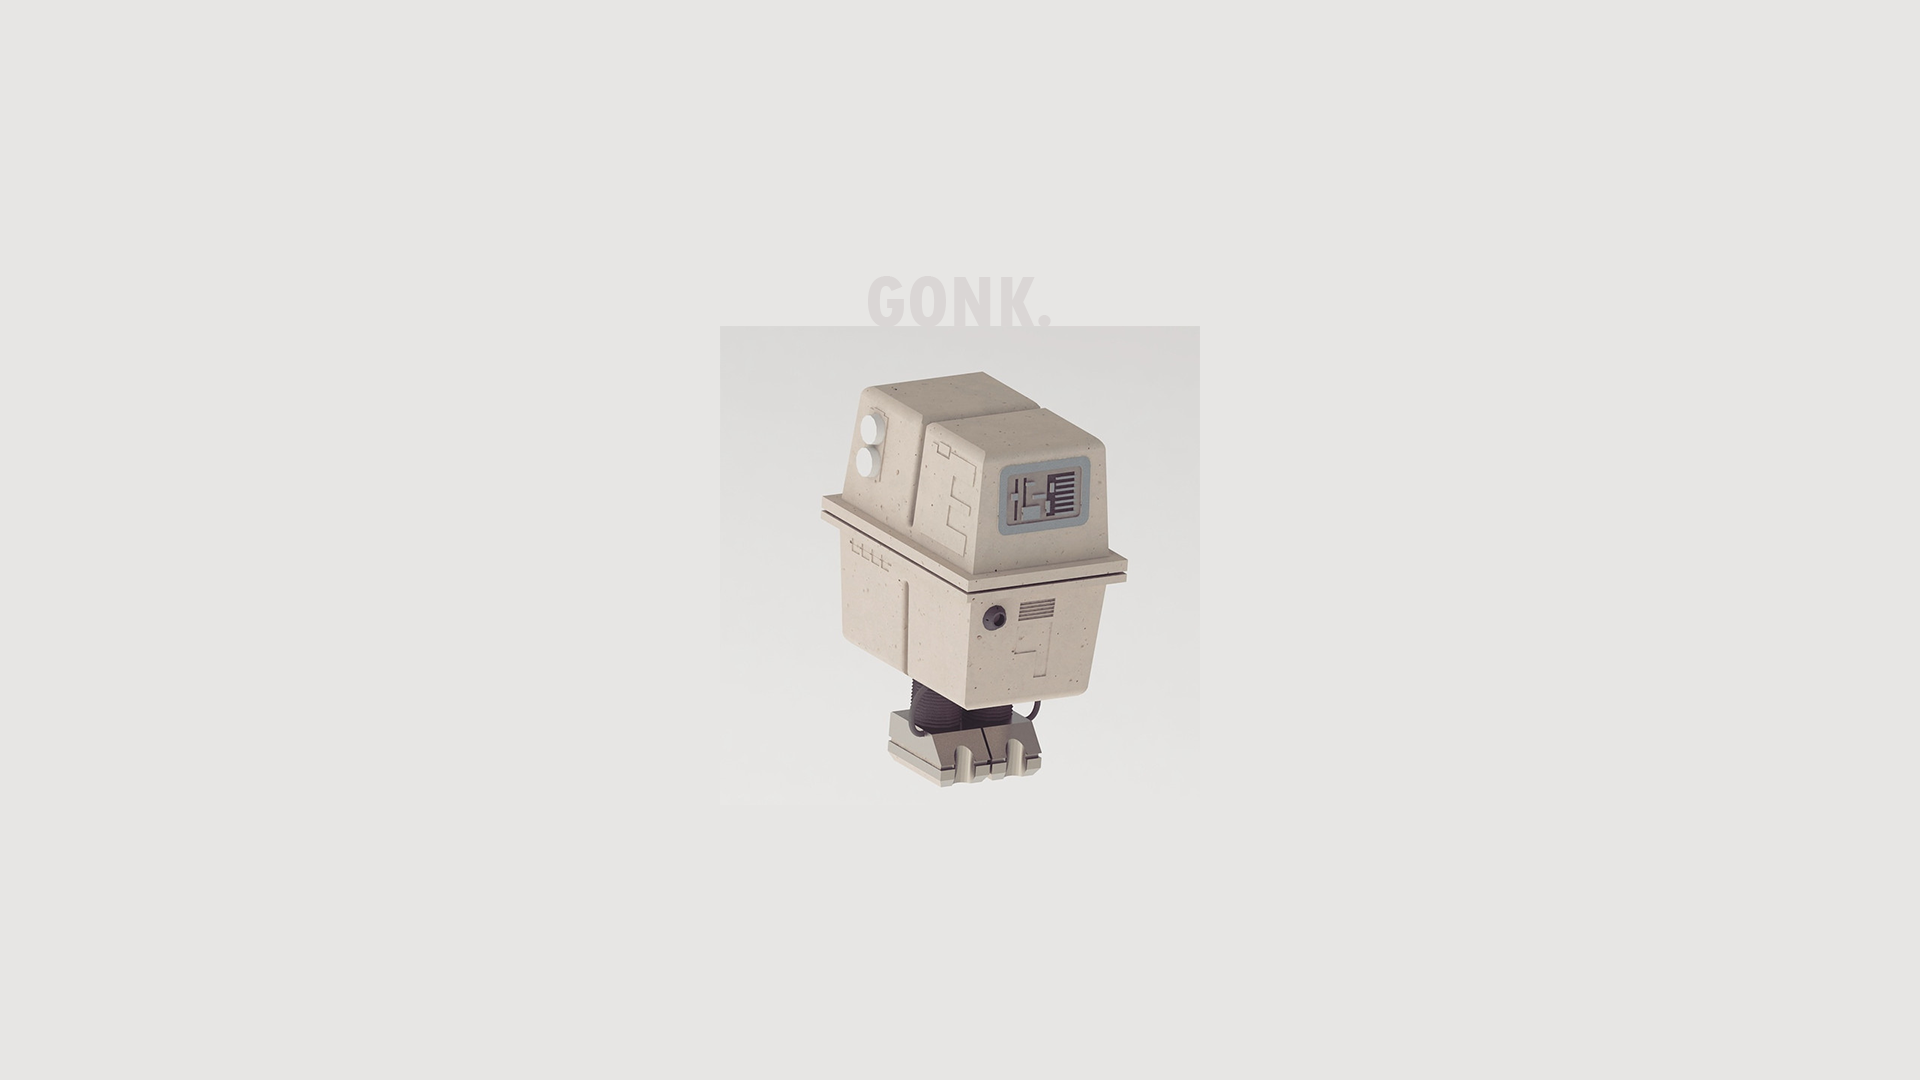 My minimal gonk droid wallpaper, found the gonk droid google and decided to make a wallpaper cause why not